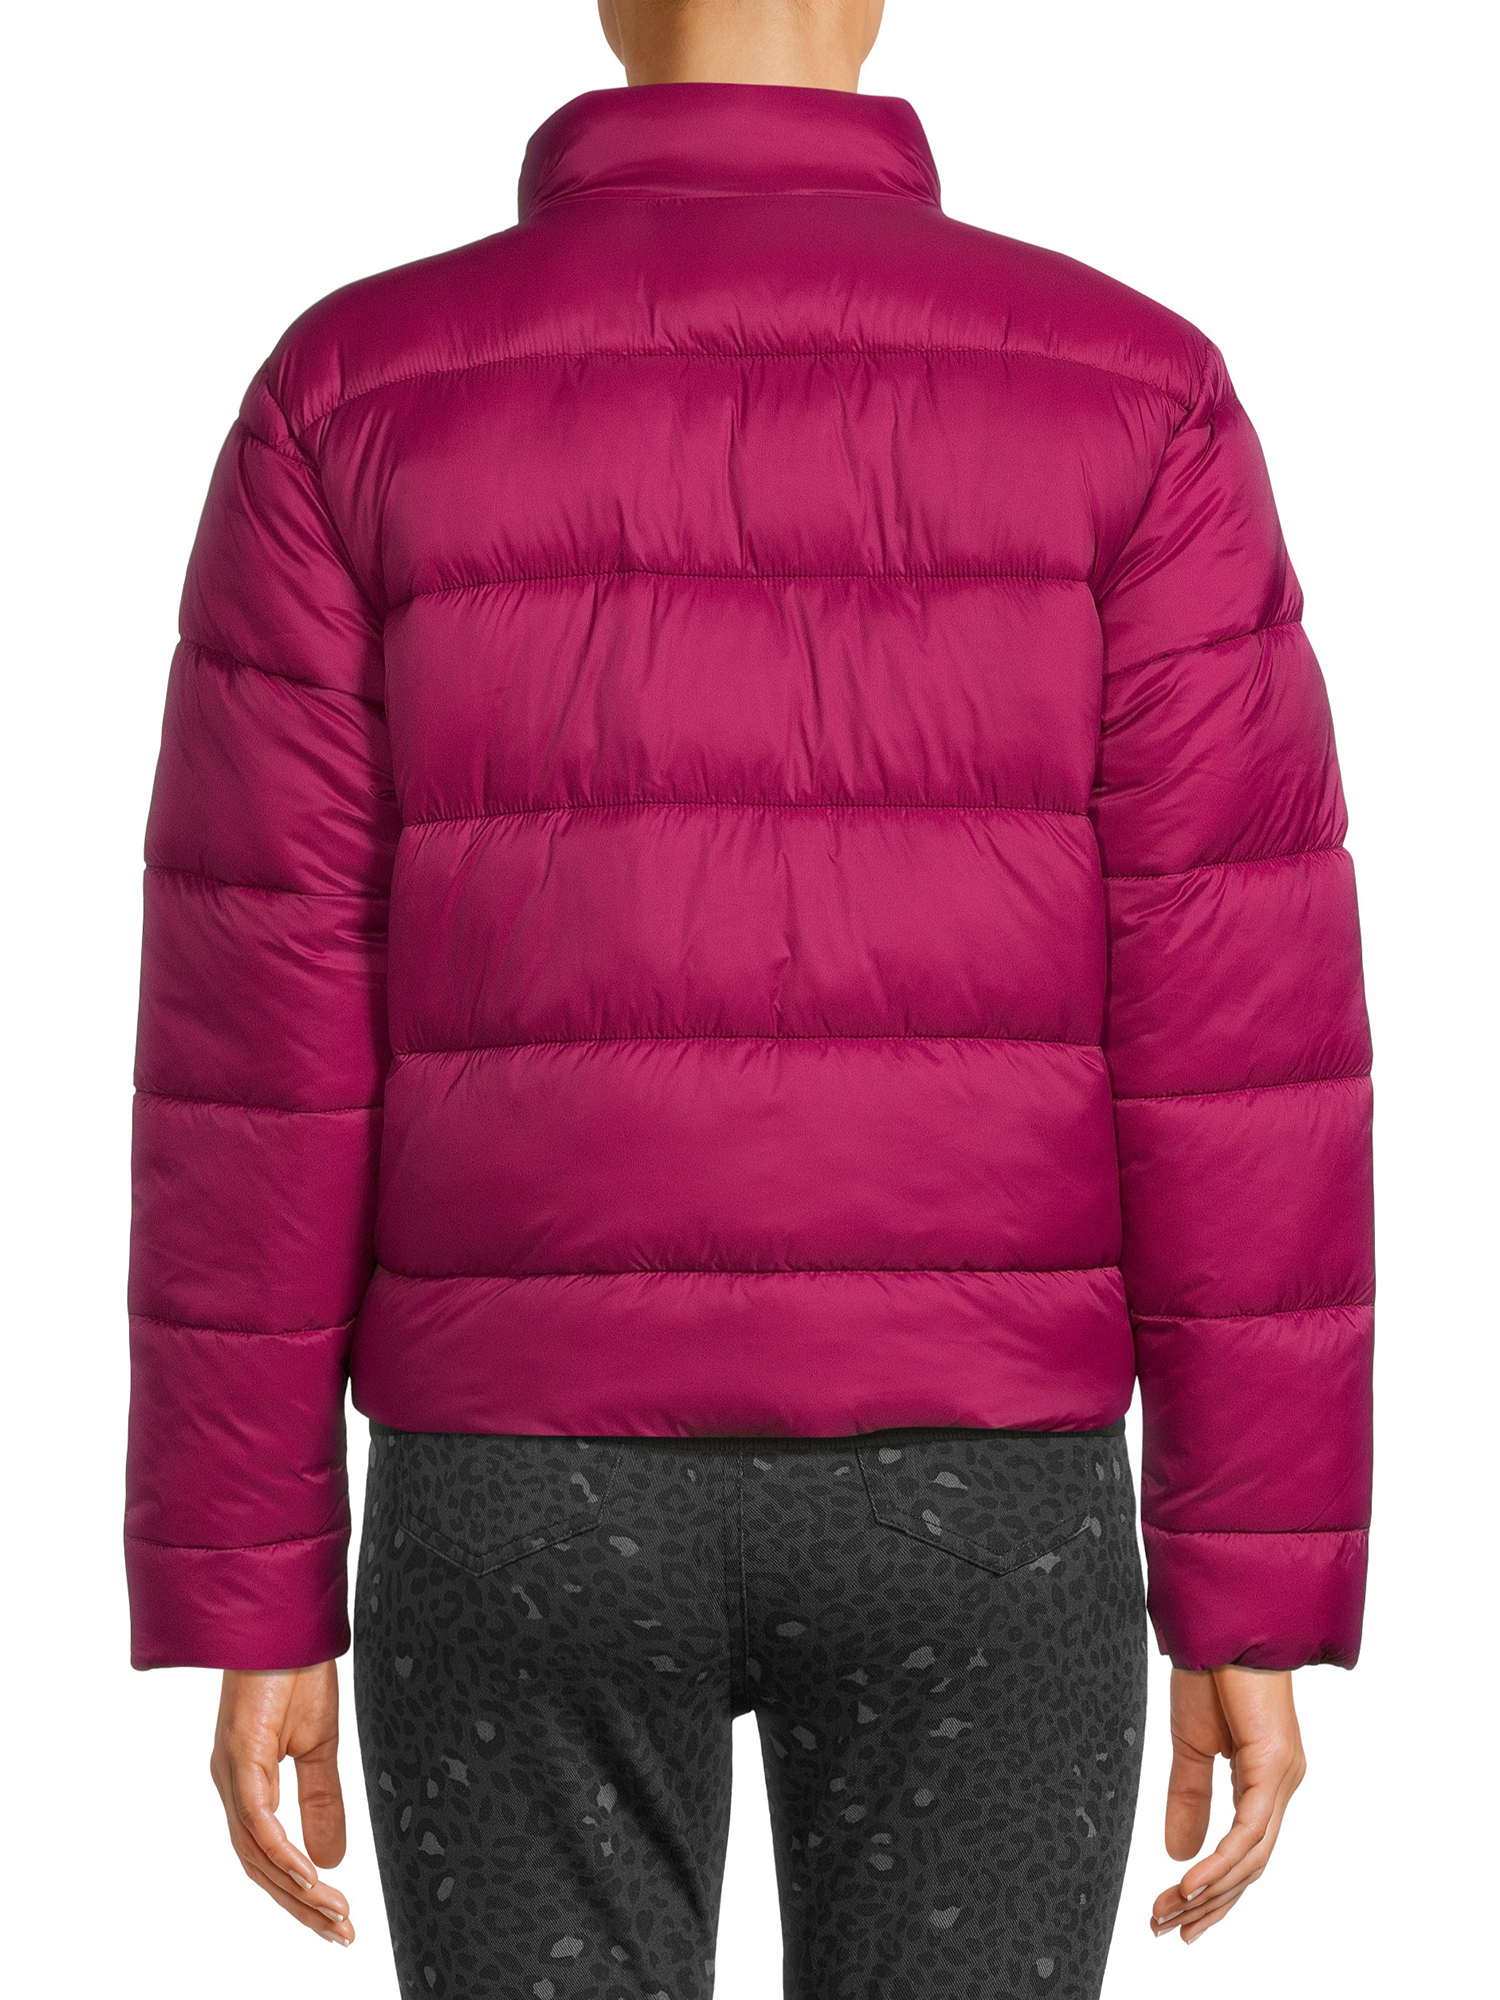 Time and Tru Women's and Plus Puffer Jacket - image 5 of 5